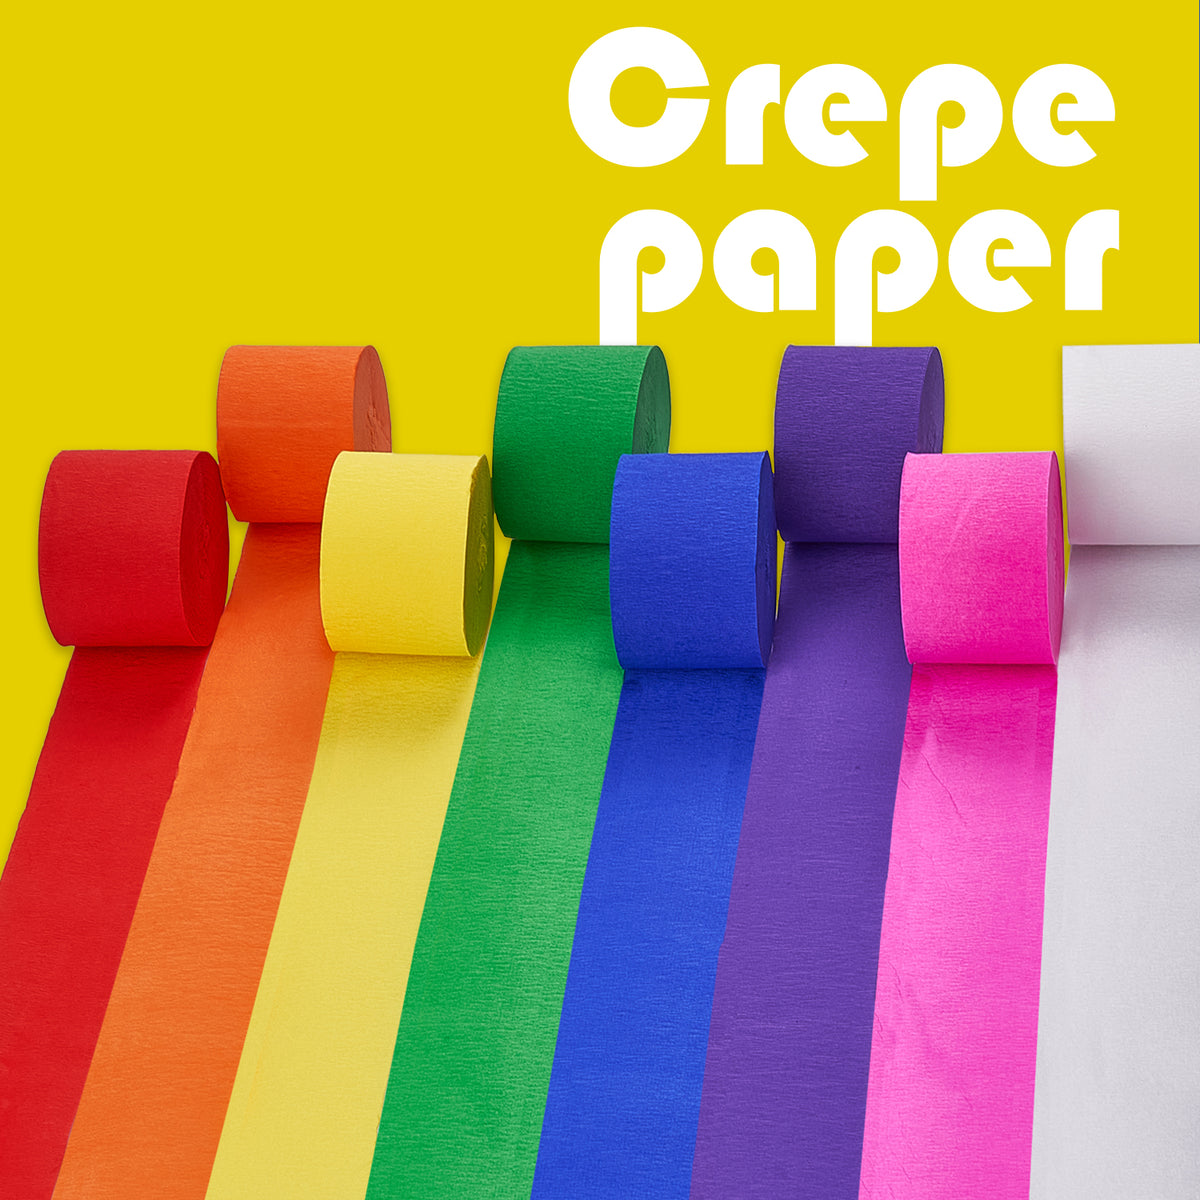 Crepe Party Streamers, 9 rolls, 3 Colors, 739 ft - Classic Pink + Classic  Yellow + Orange - 243' per color (3 rolls per color, 81 foot each roll) 